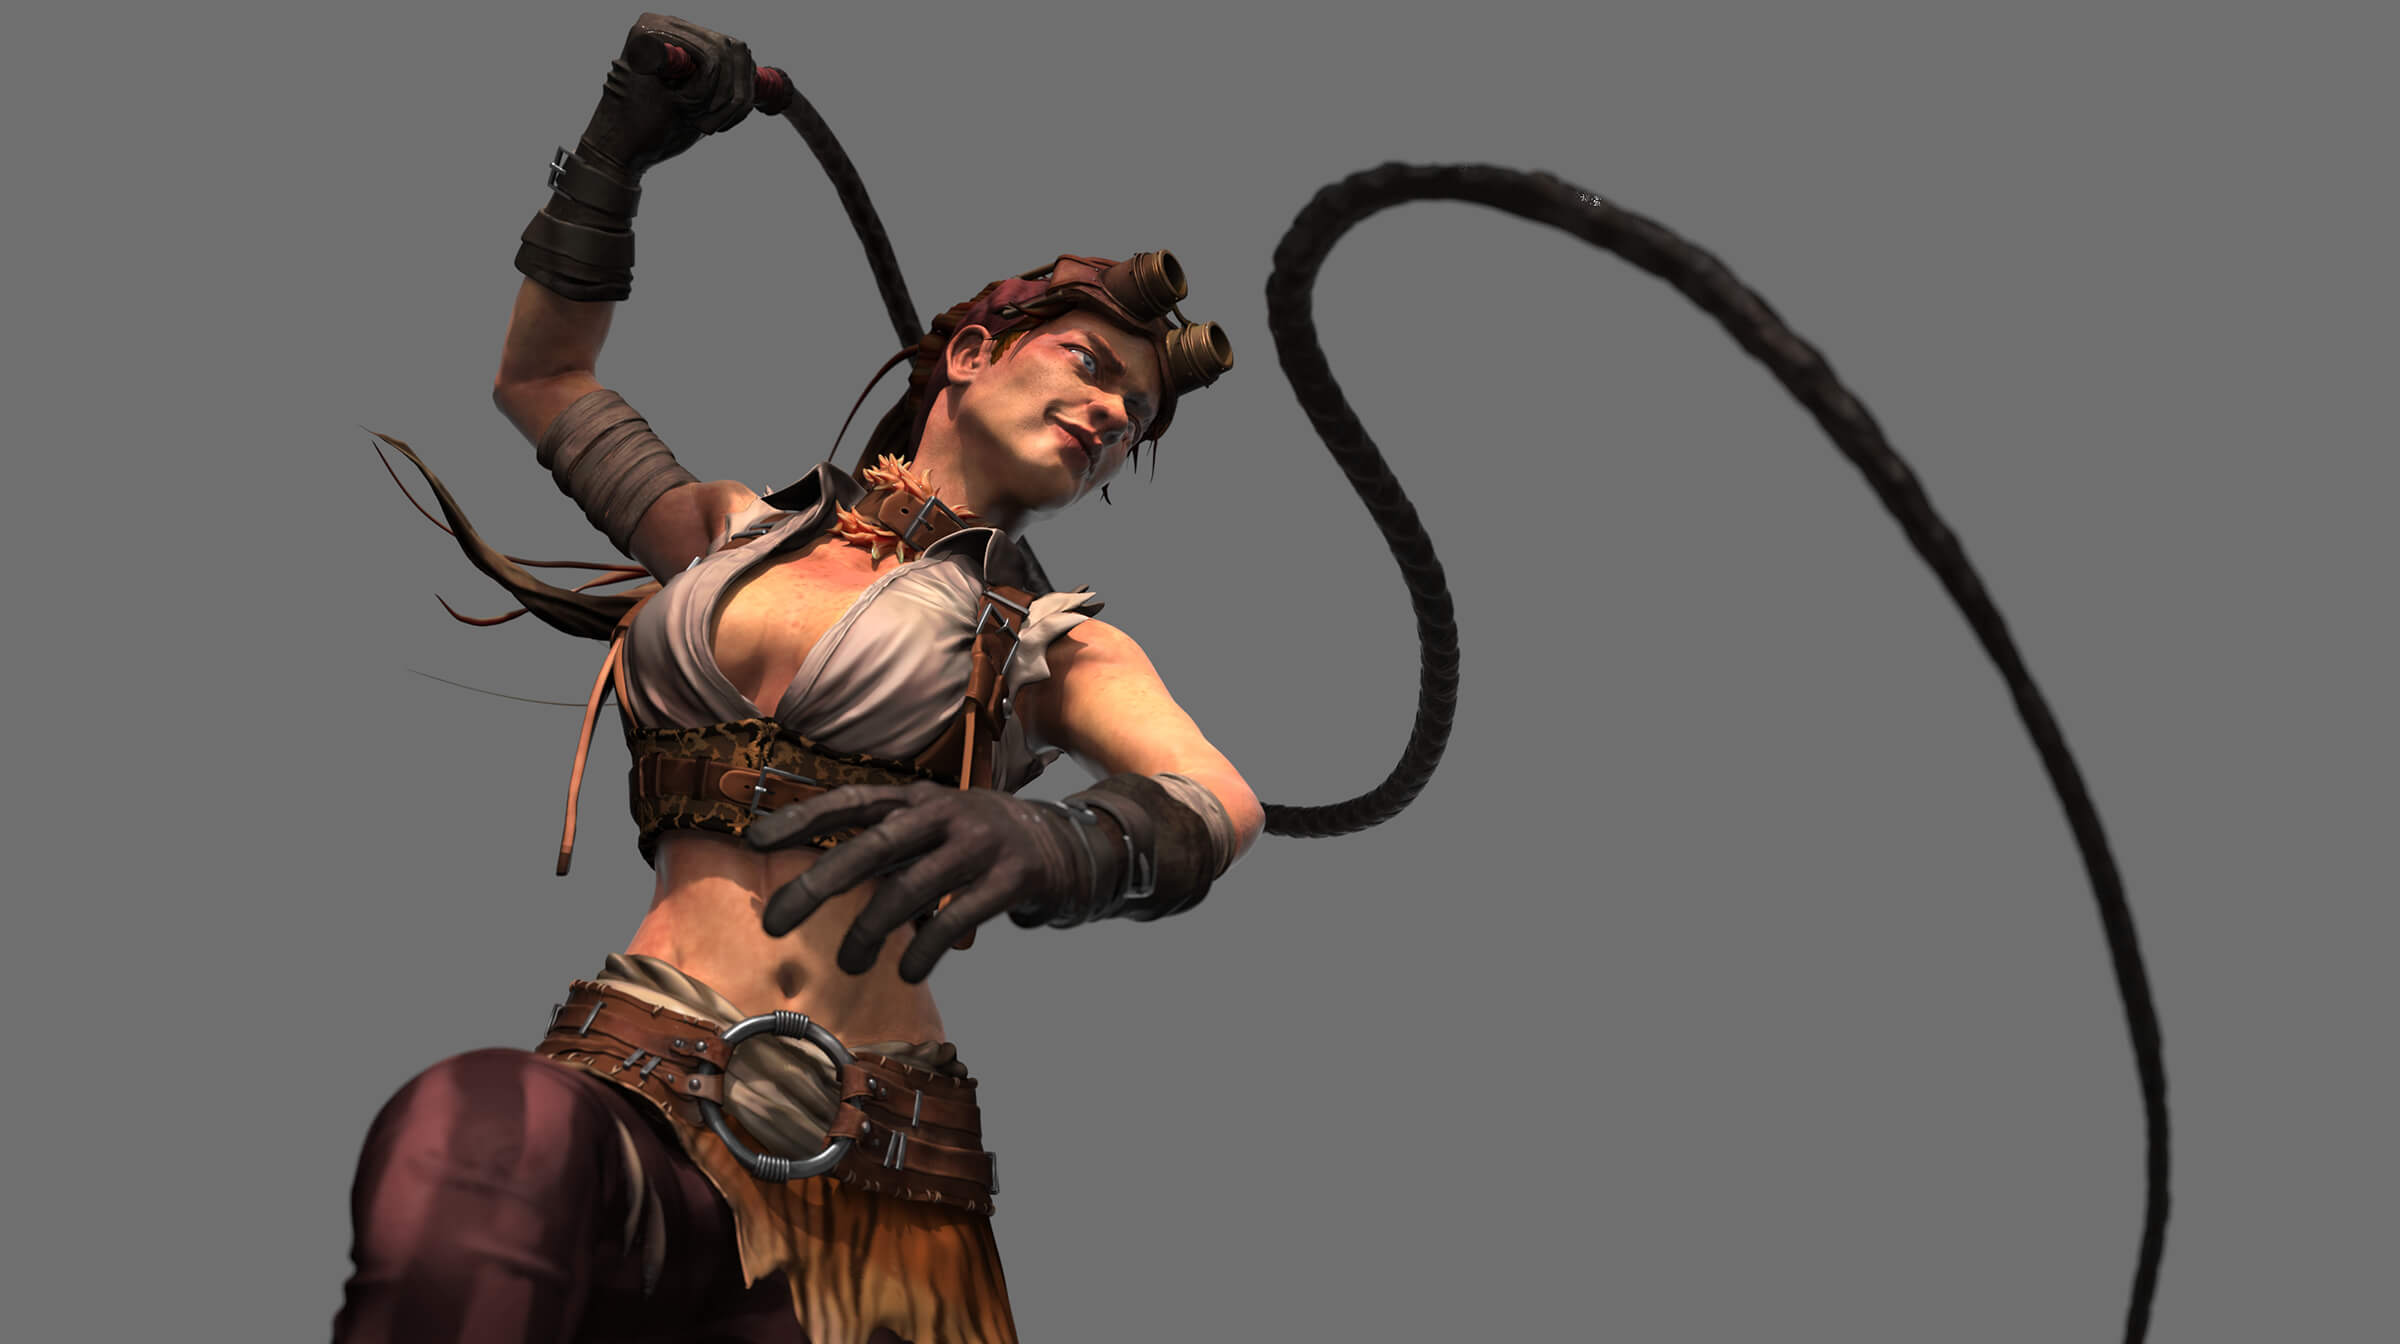 A woman wearing goggles and gloves, brandishing a whip